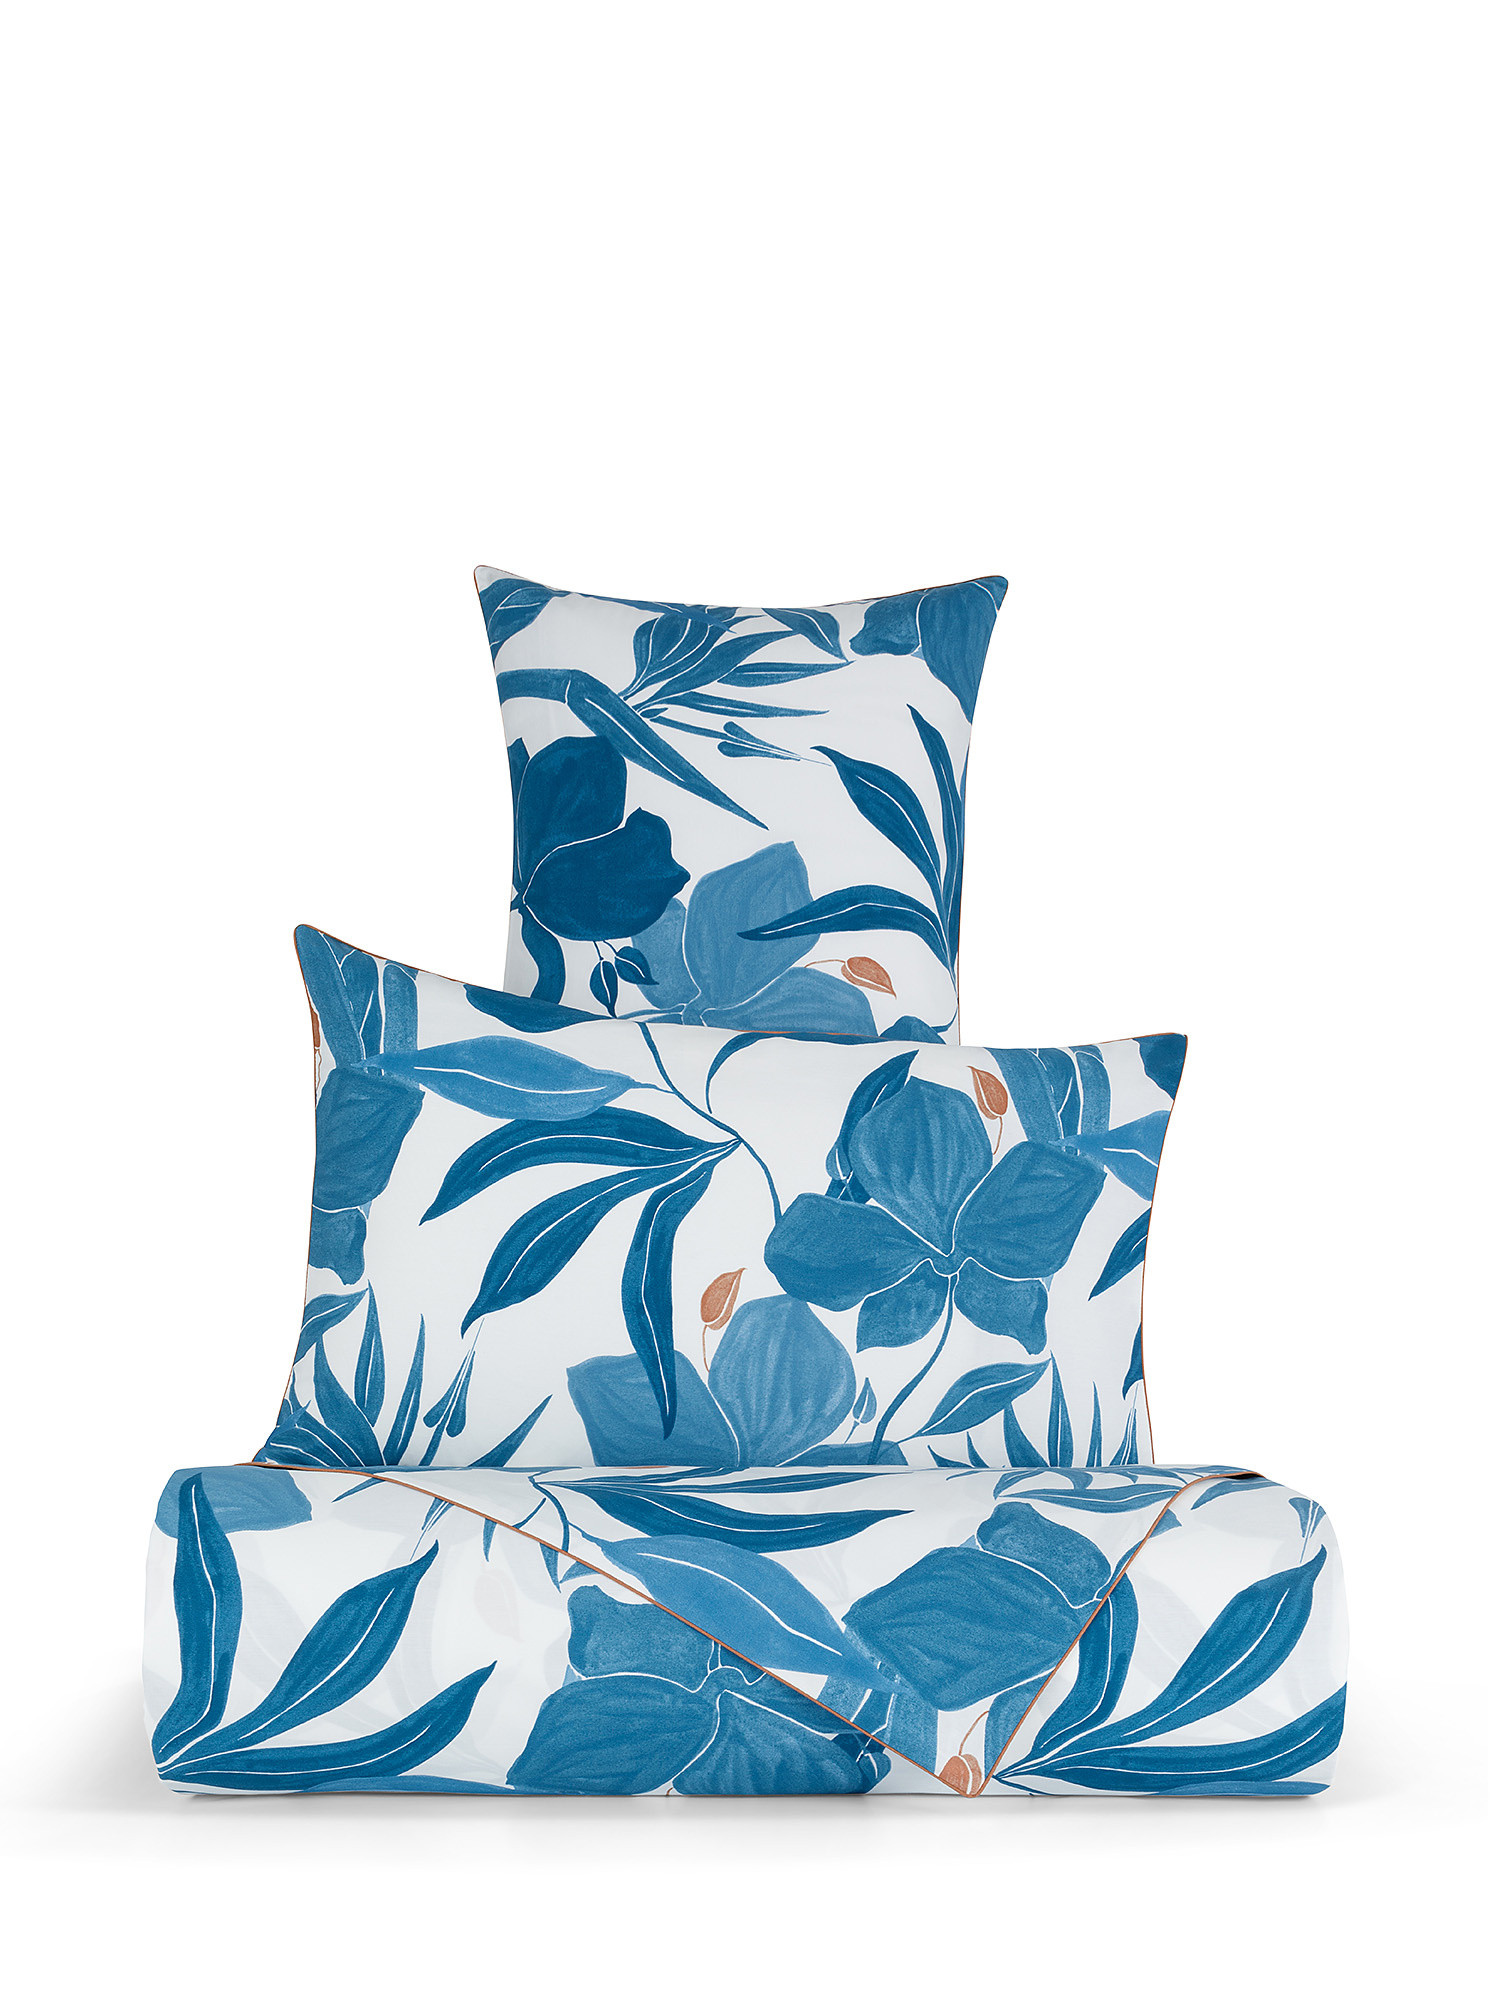 Floral patterned percale cotton pillowcase, Blue, large image number 1